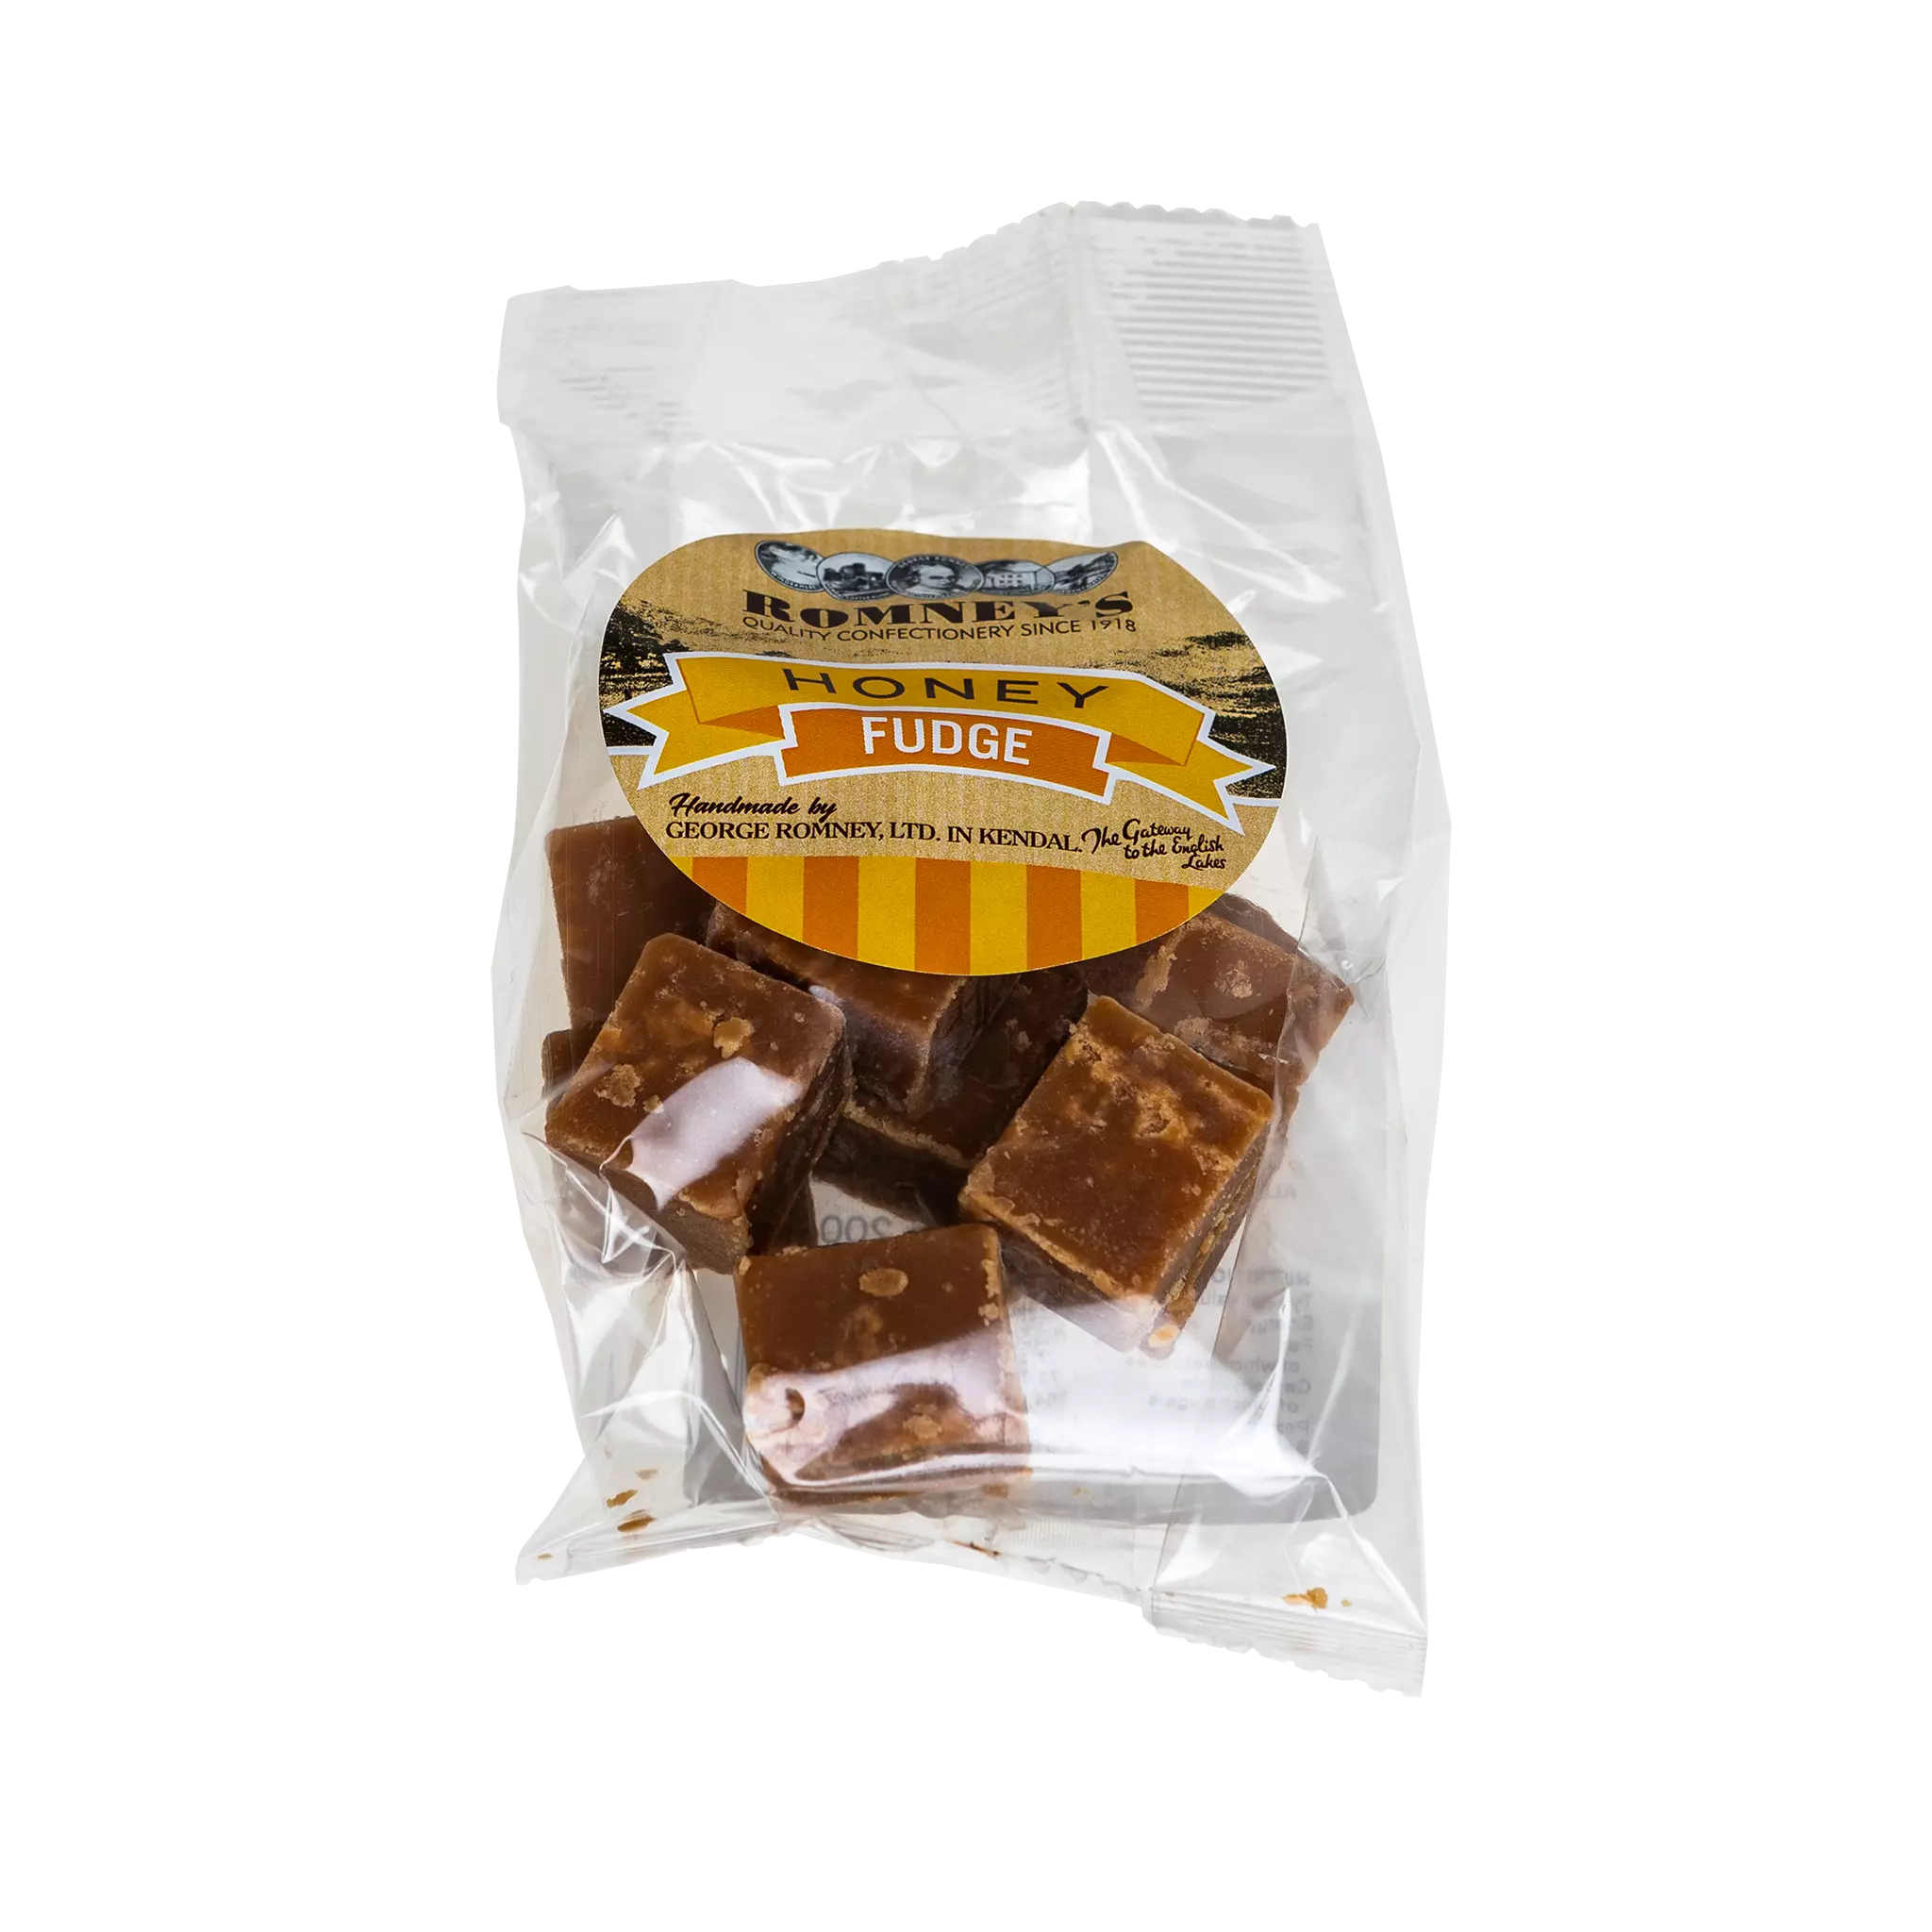 A transparent bag containing pieces of Fudge. The bag has a label on it that shows Romney's logo and says 'Honey Fudge'.